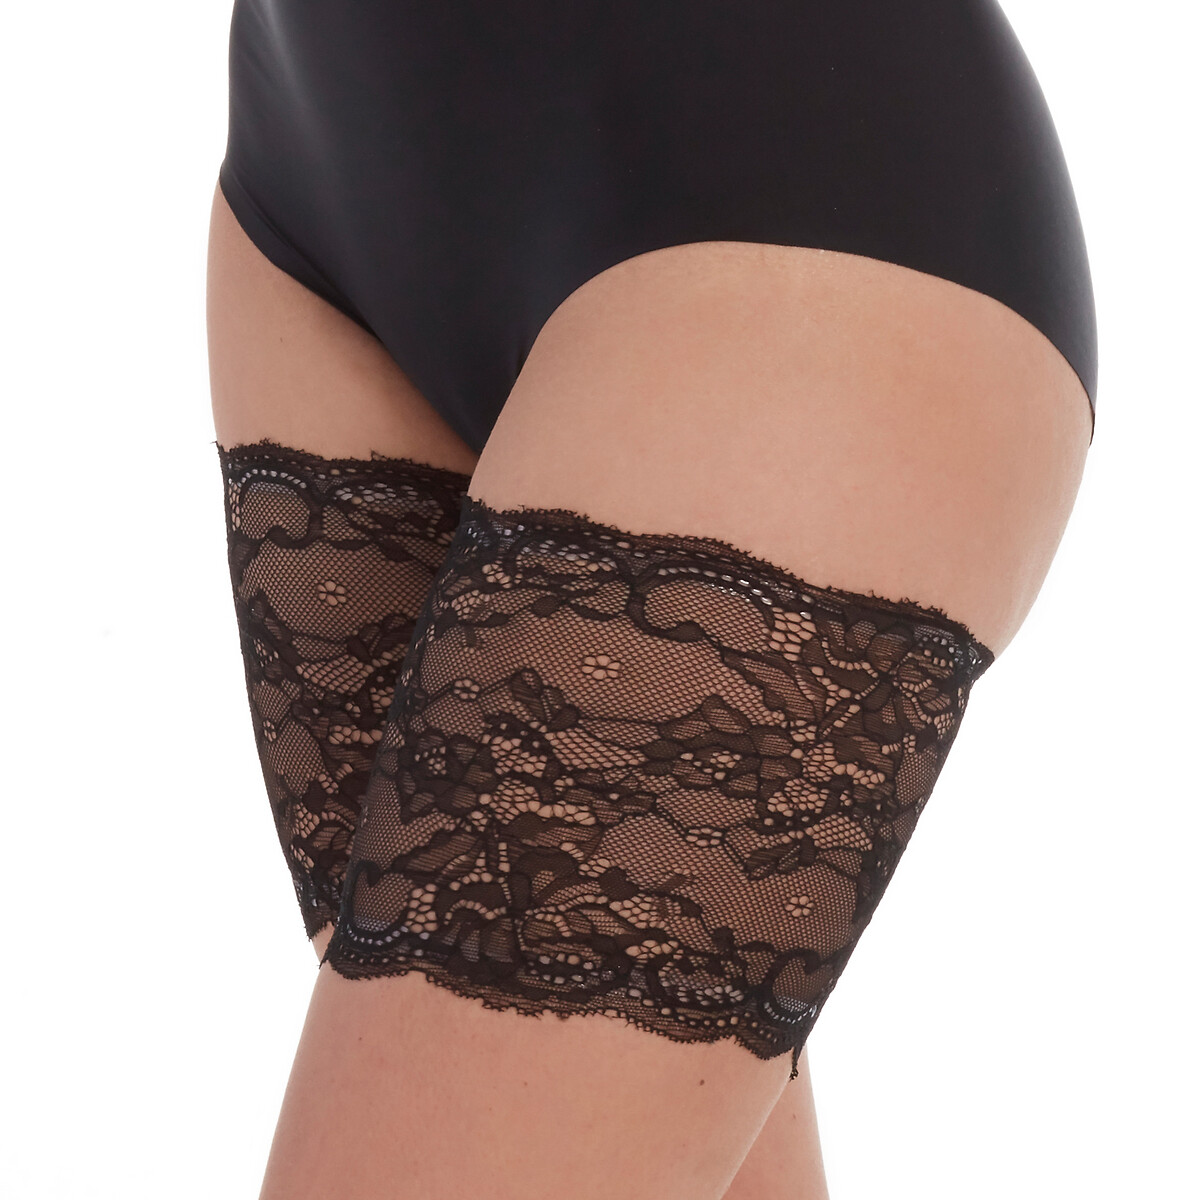 Anti-Chafing Thigh Bands in Lace